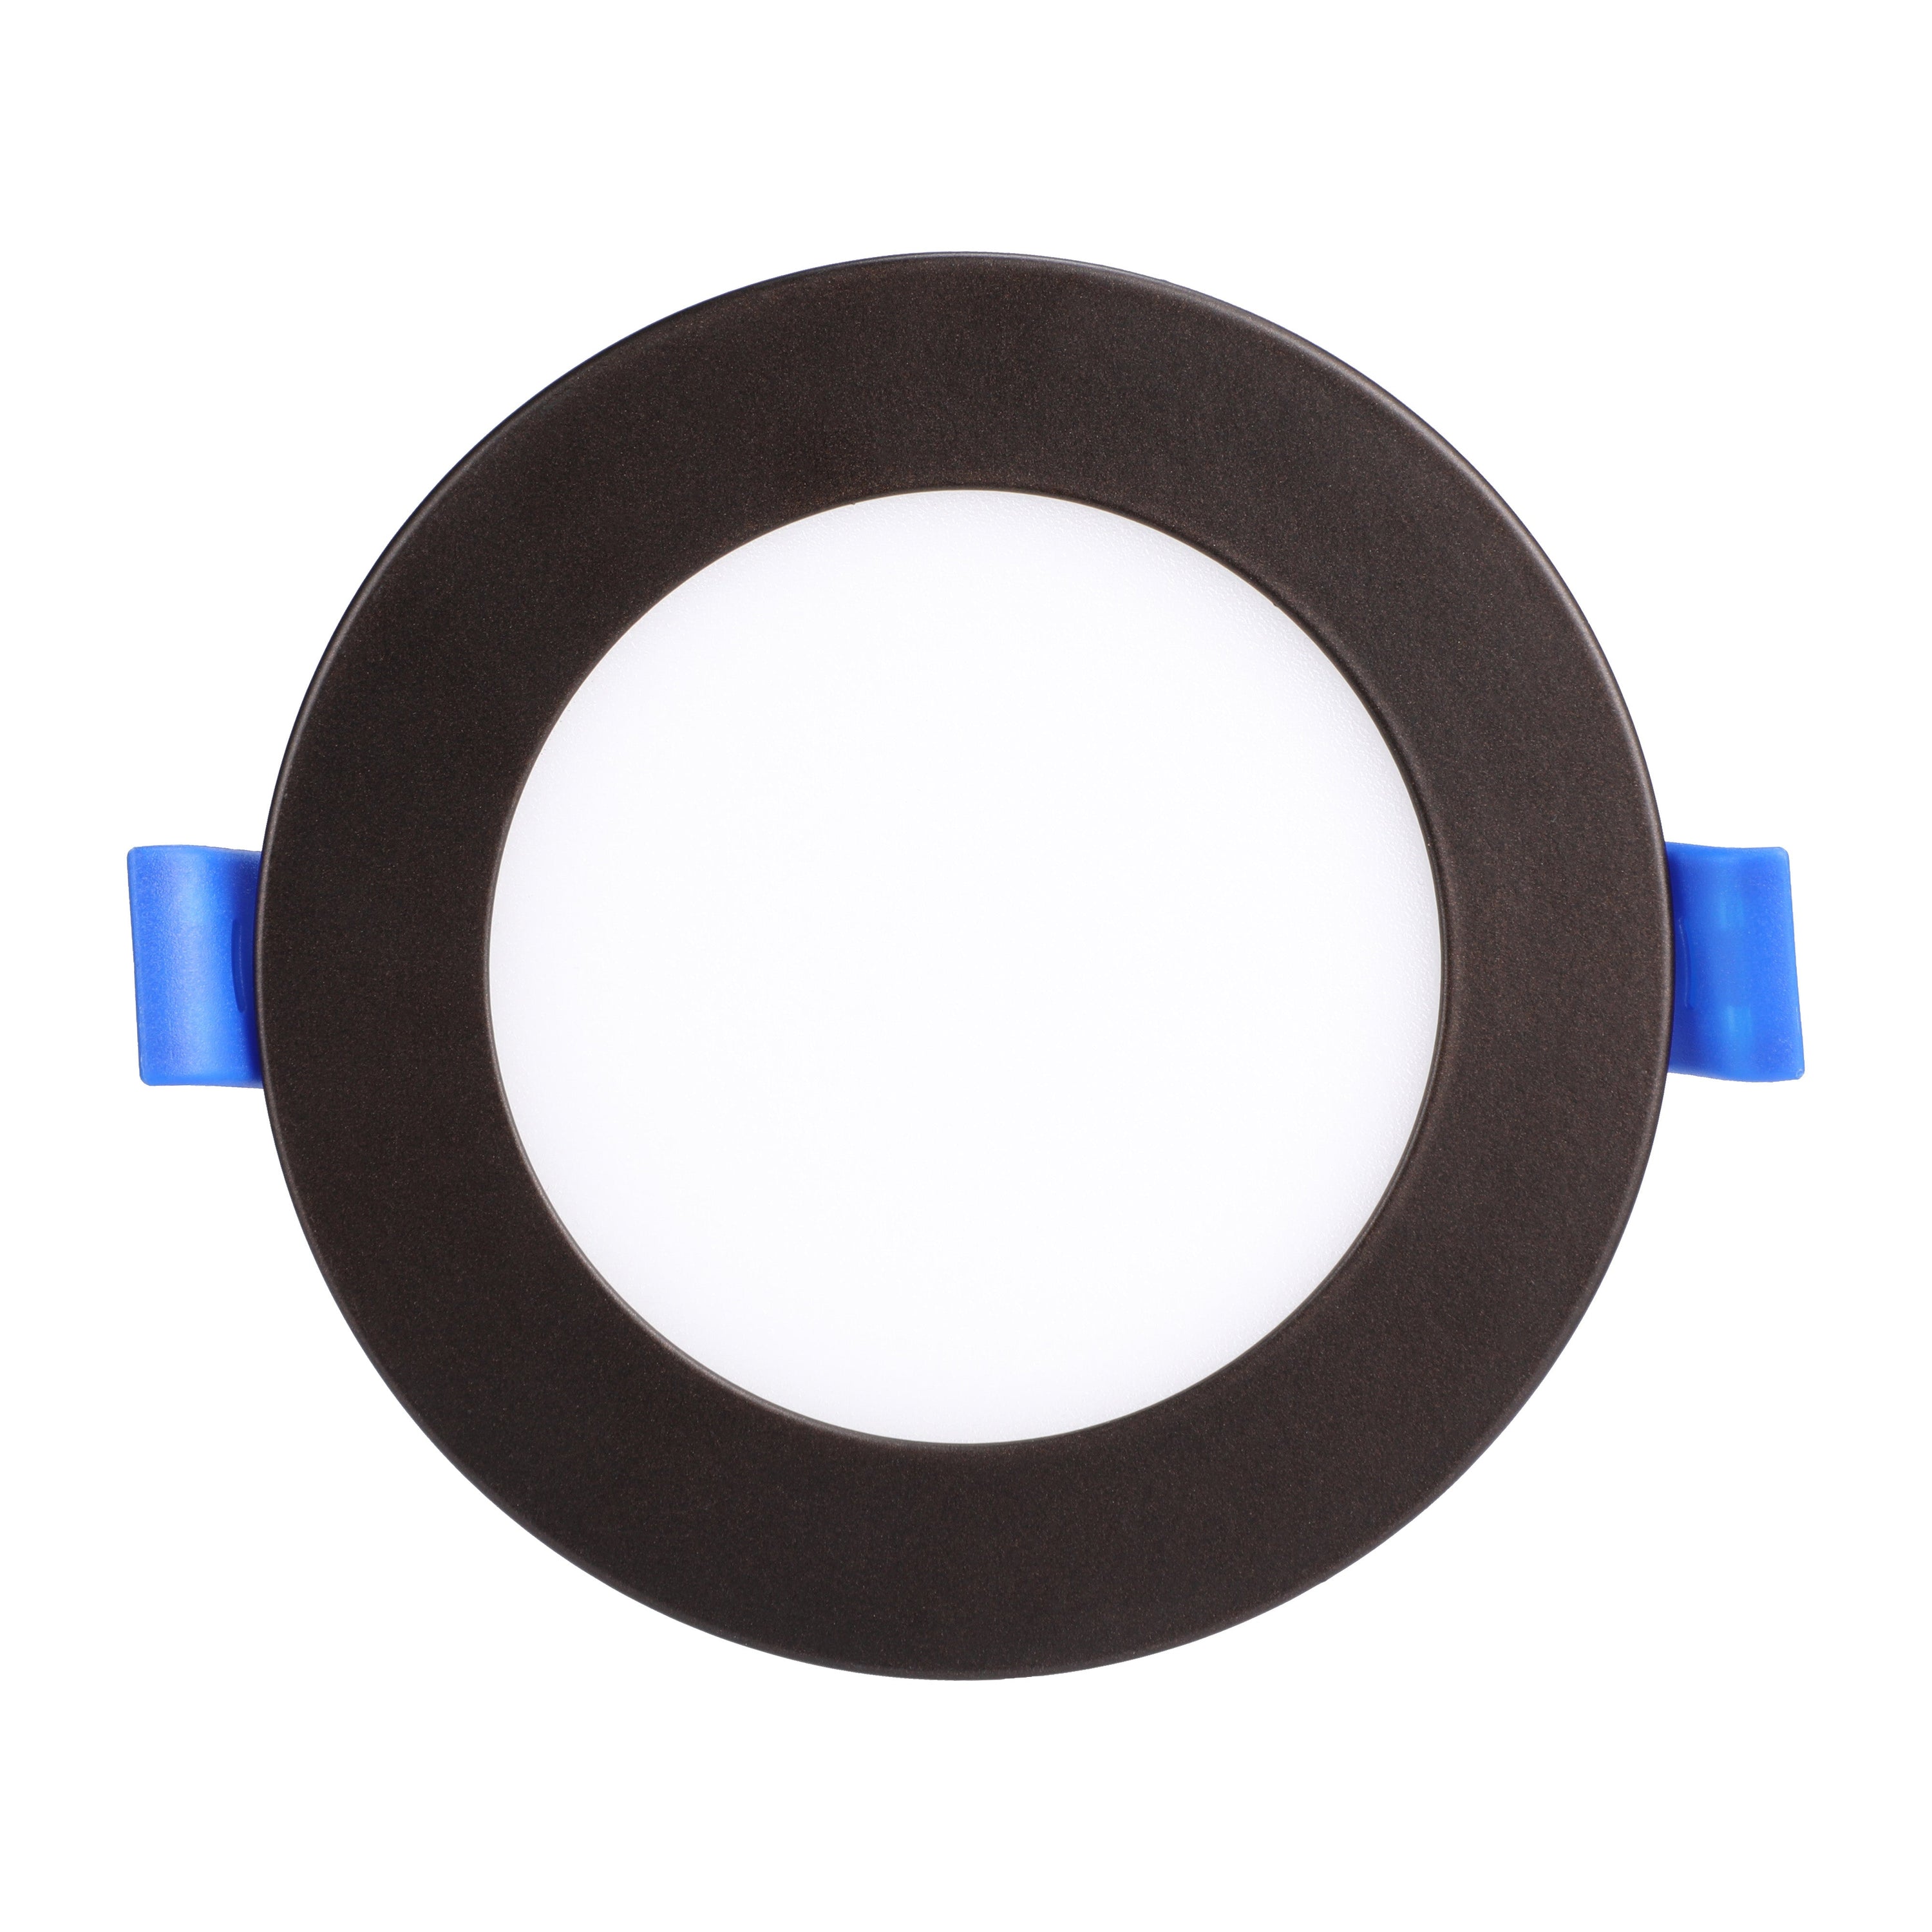 SlimPanel+ Colour 4" LED Ultra-thin Recessed Light - Oil Rubbed Bronze - 10W - Adjustable CCT